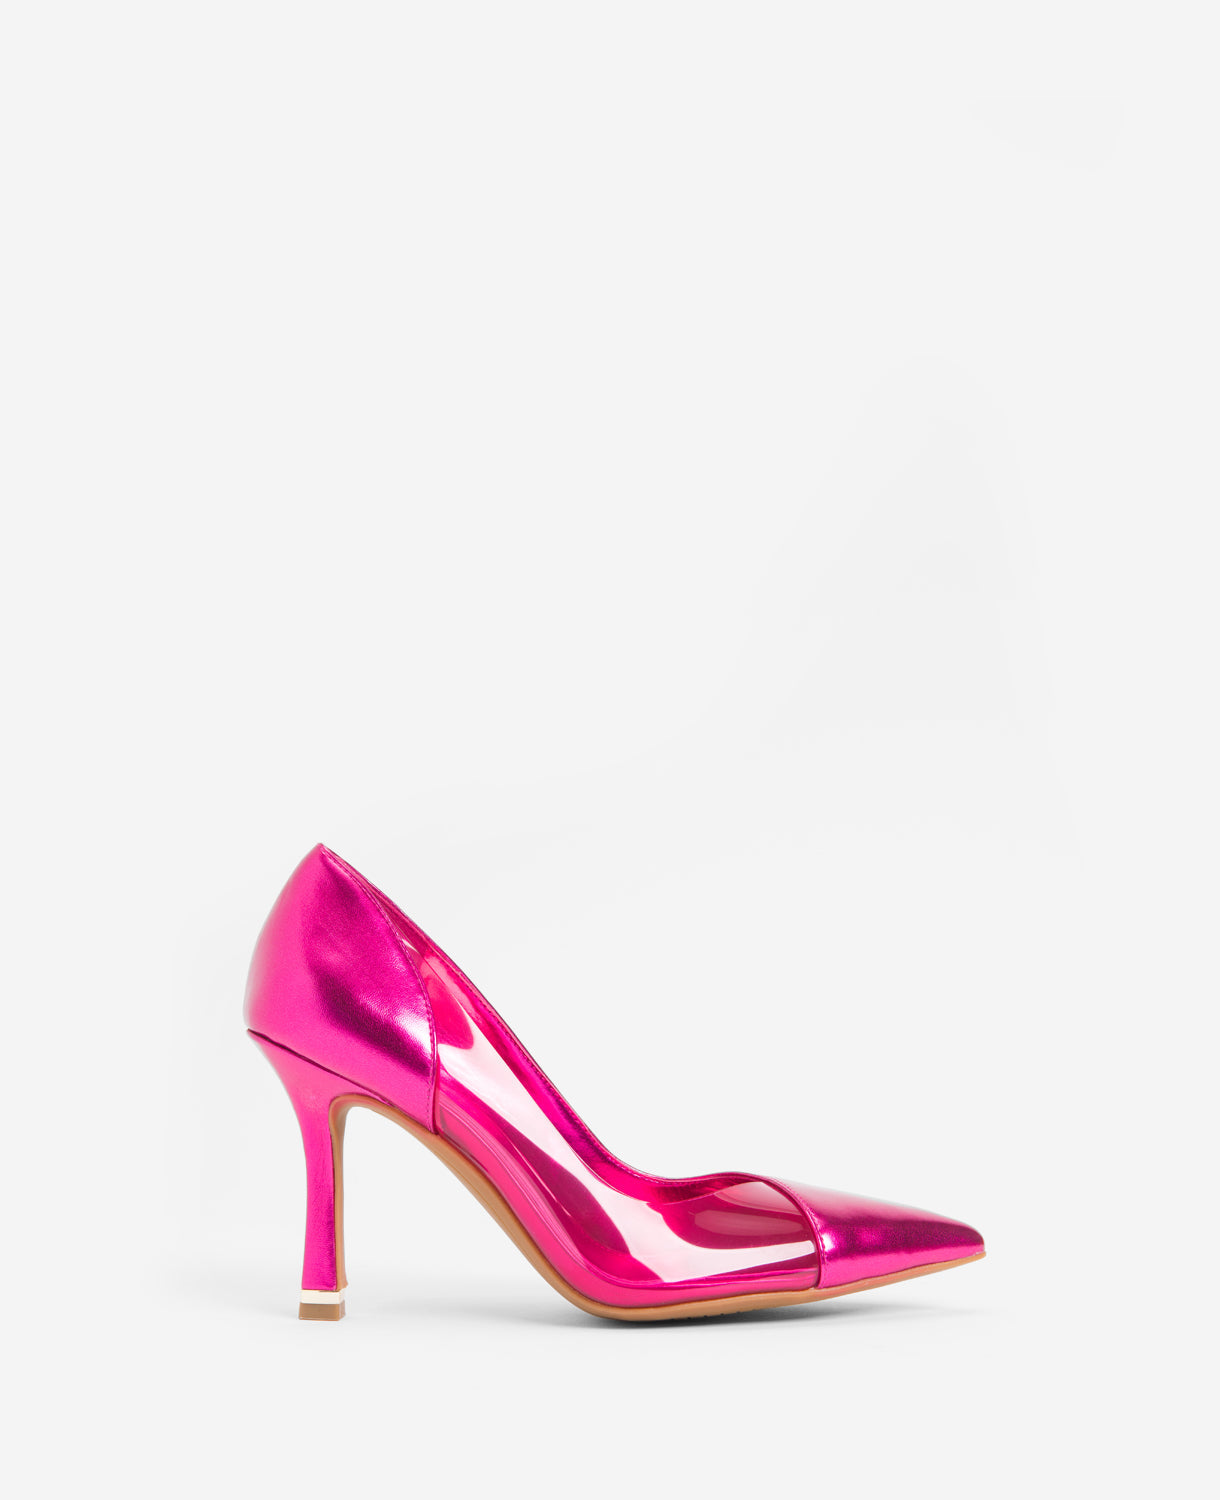 Kenneth Cole | Rosa Metallic Leather And Vinyl Heel in Hot Pink PU, Size: 5.5